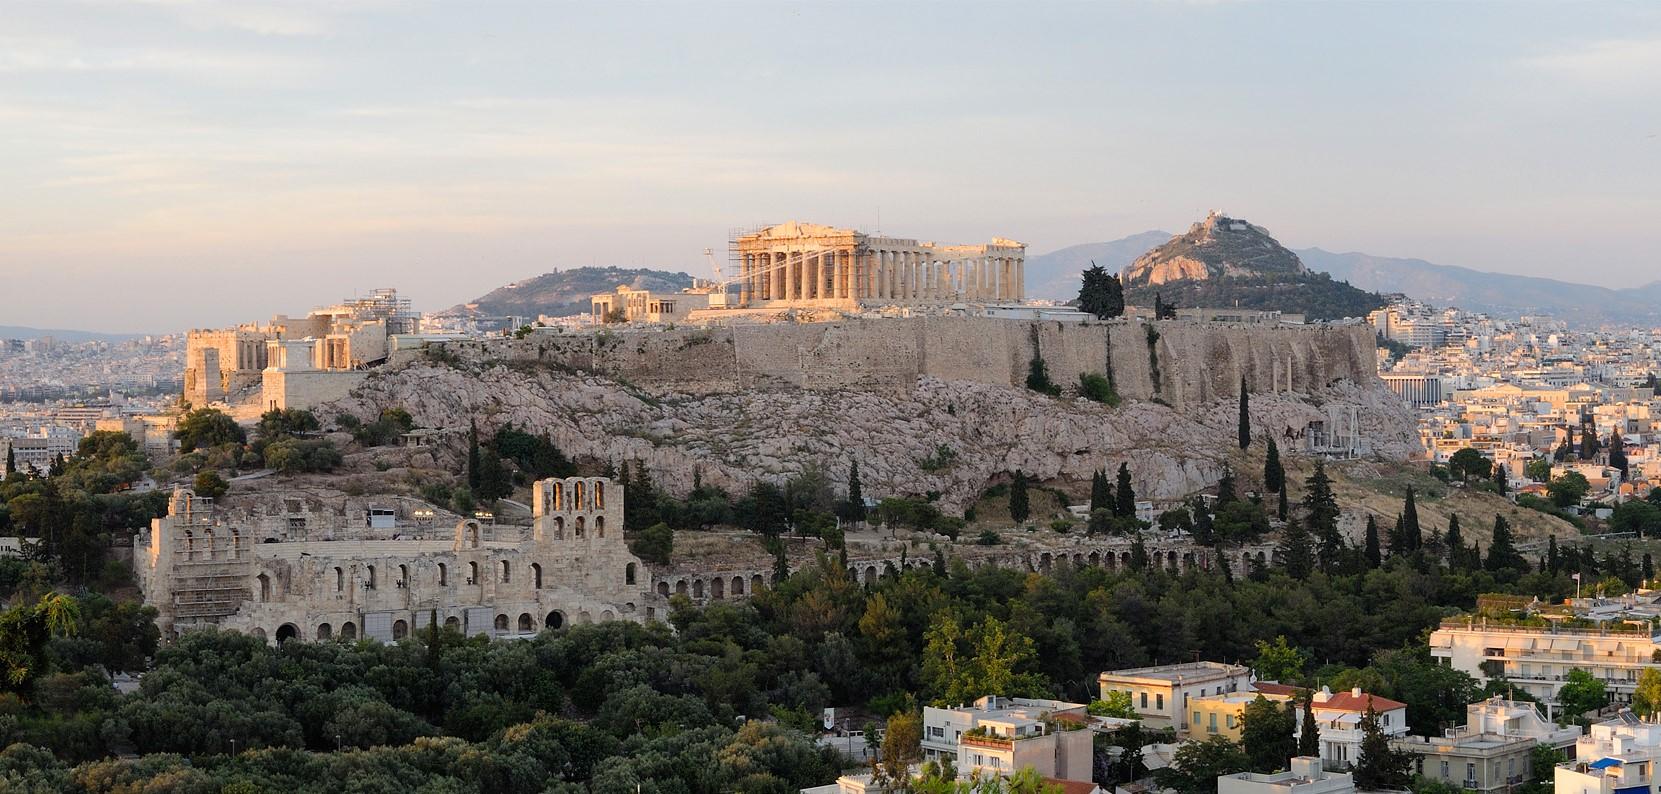 The Acropolis in Athens, Greece, as viewed from the Mouseion Hill. – © Christophe Meneboeuf